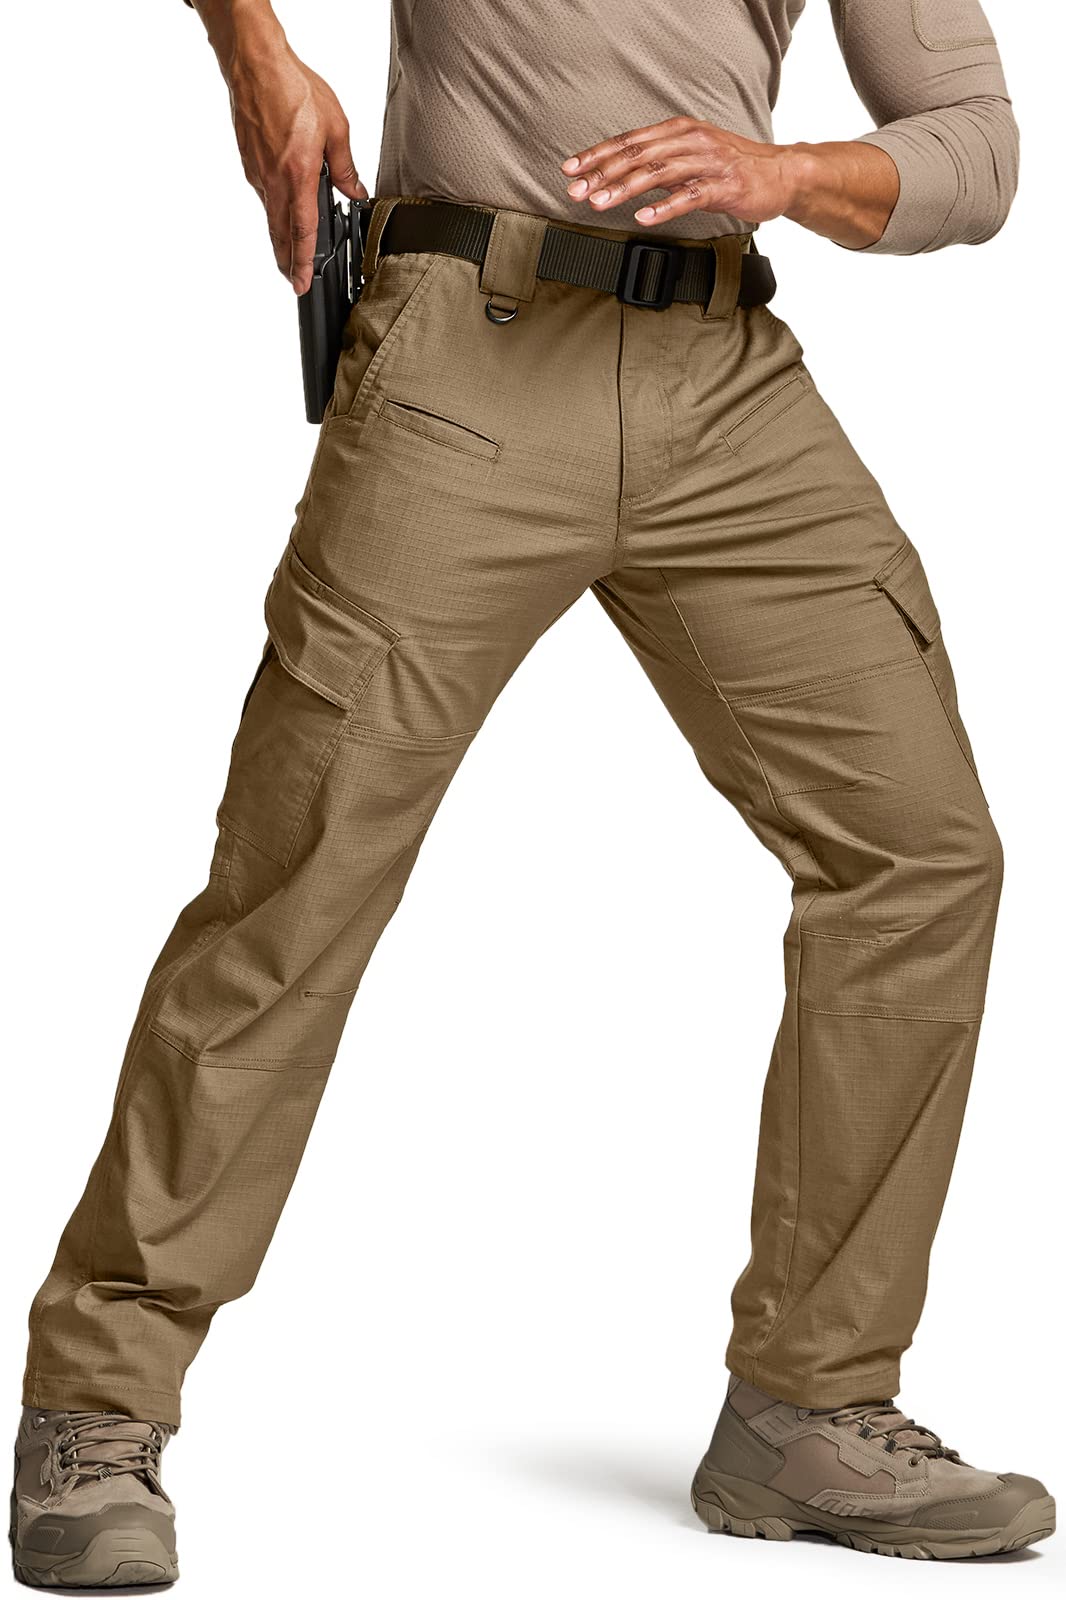 FREE SOLDIER Men's Cargo Pants,Tactical Pants for Men Stretch,Durable  Ripstop EDC Work Pants for Hiking